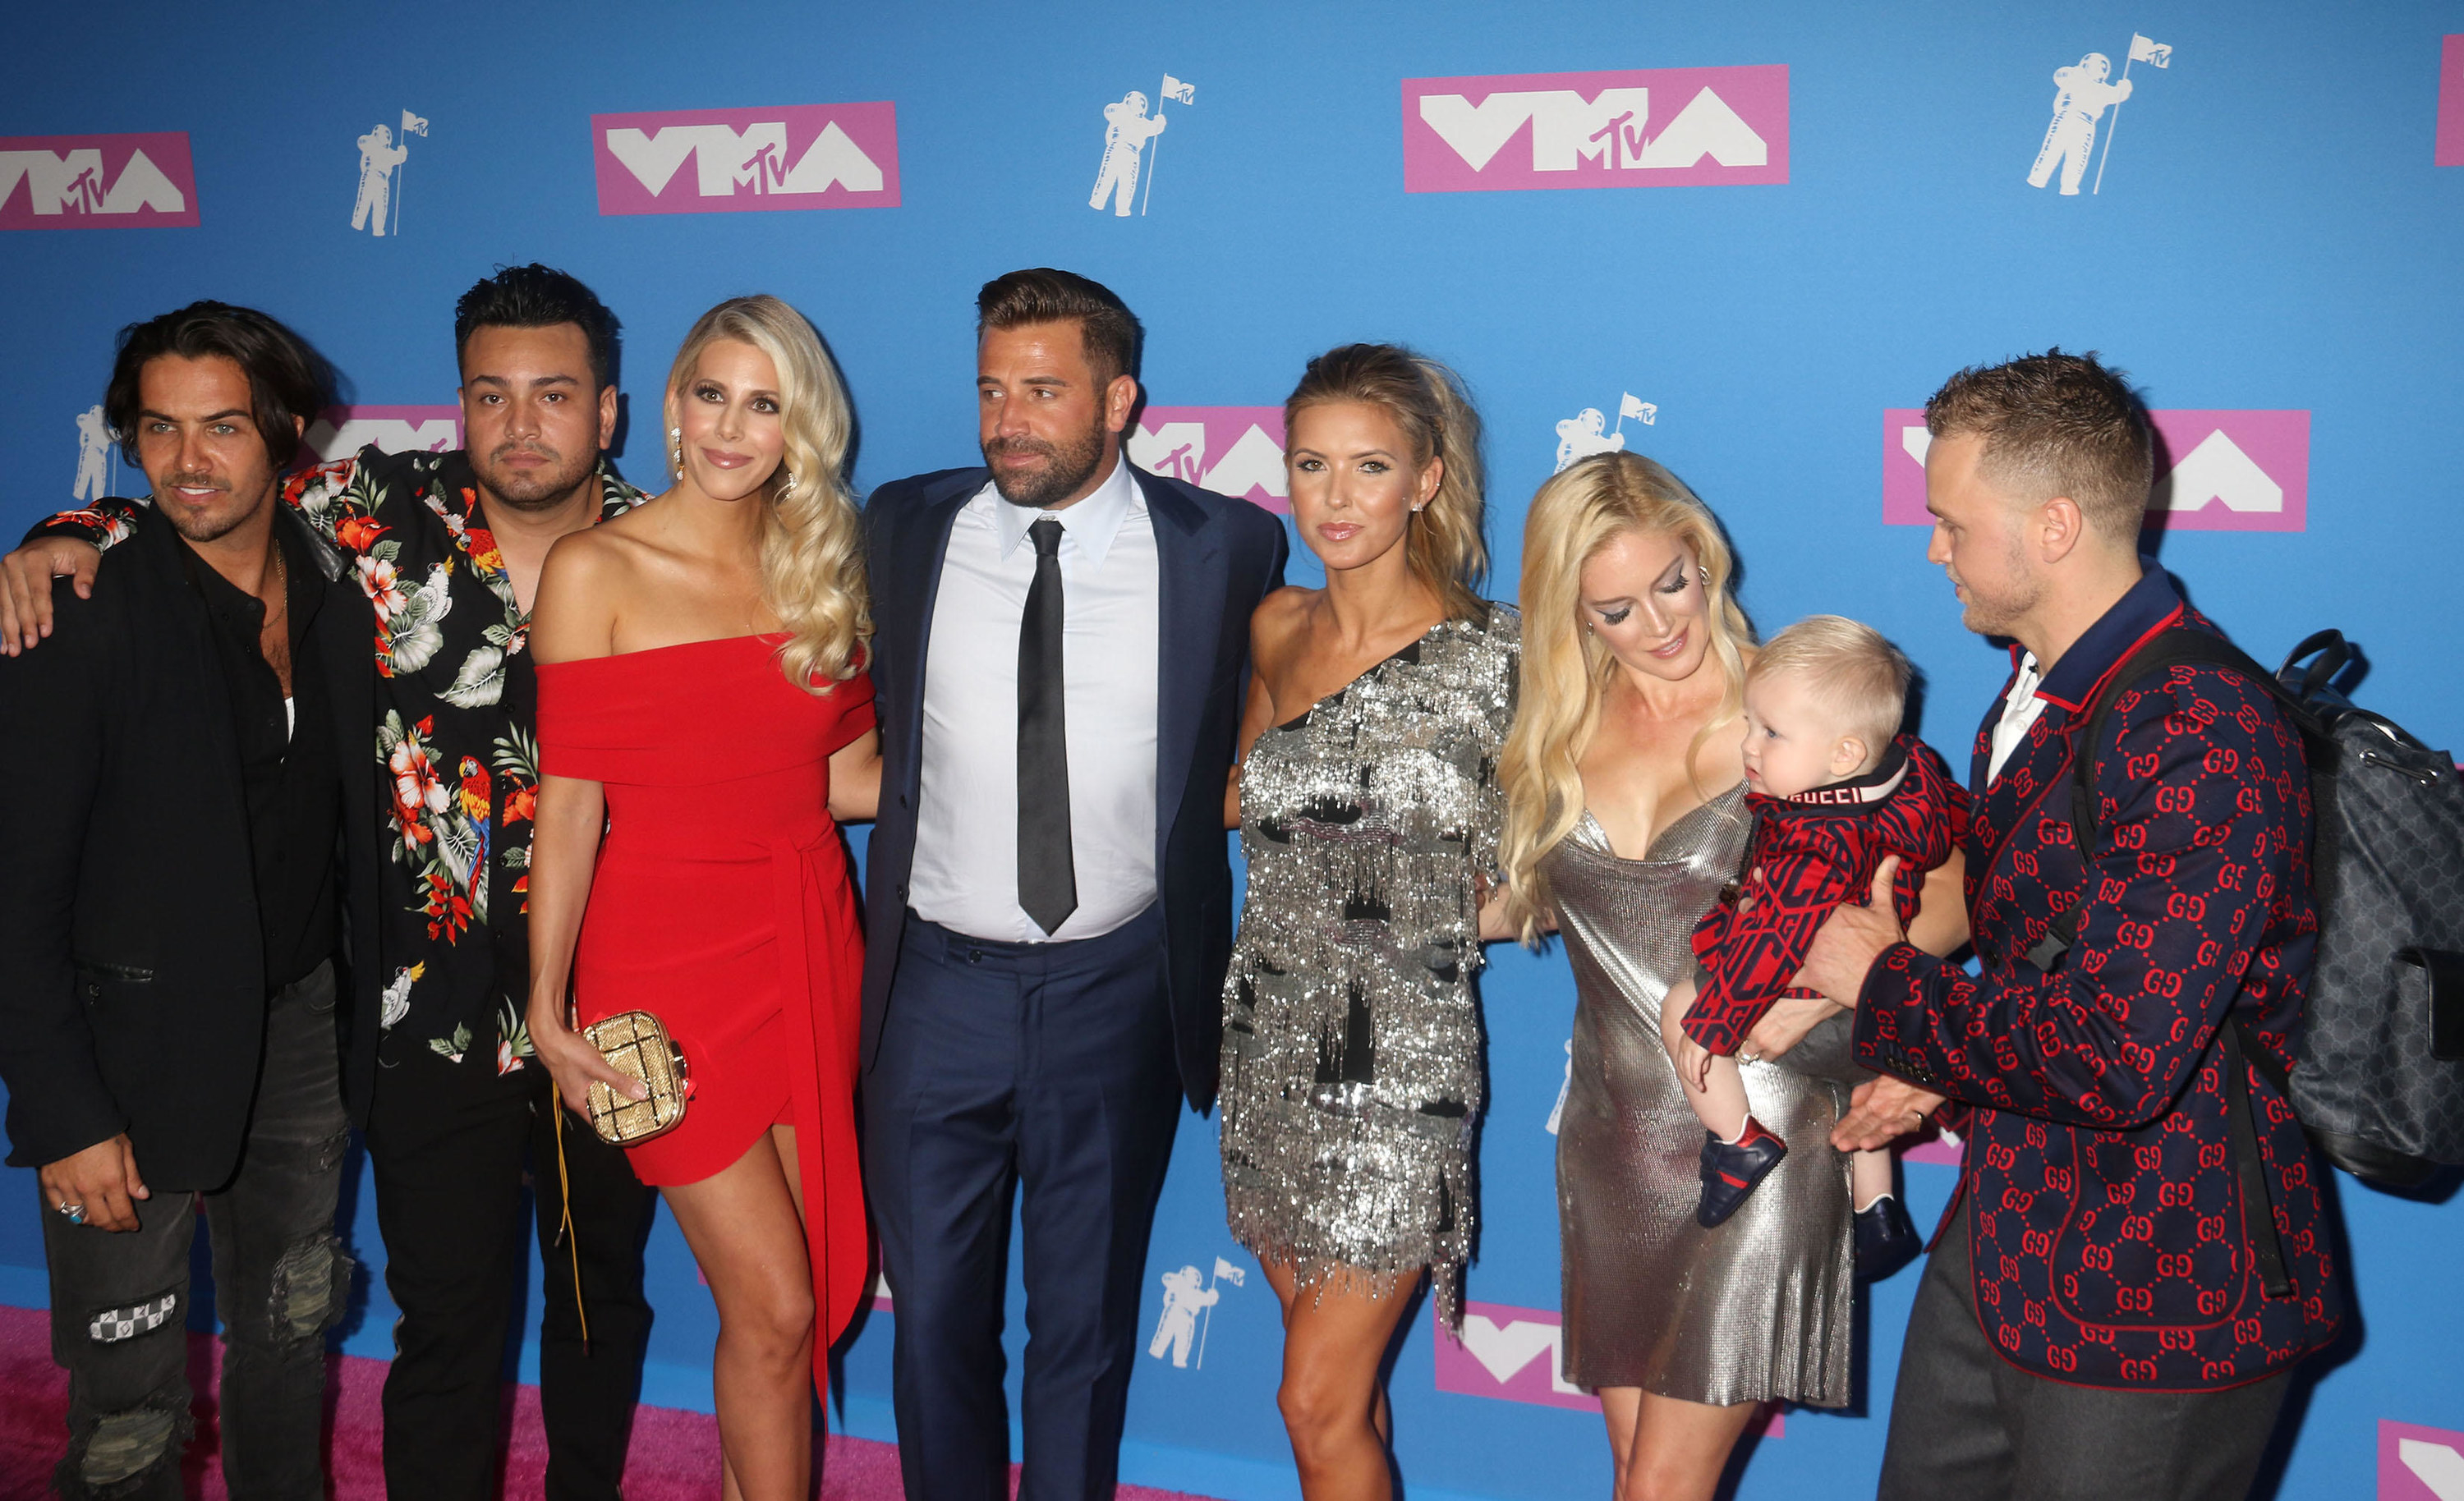 Cast photo of The Hills stars at the VMAs